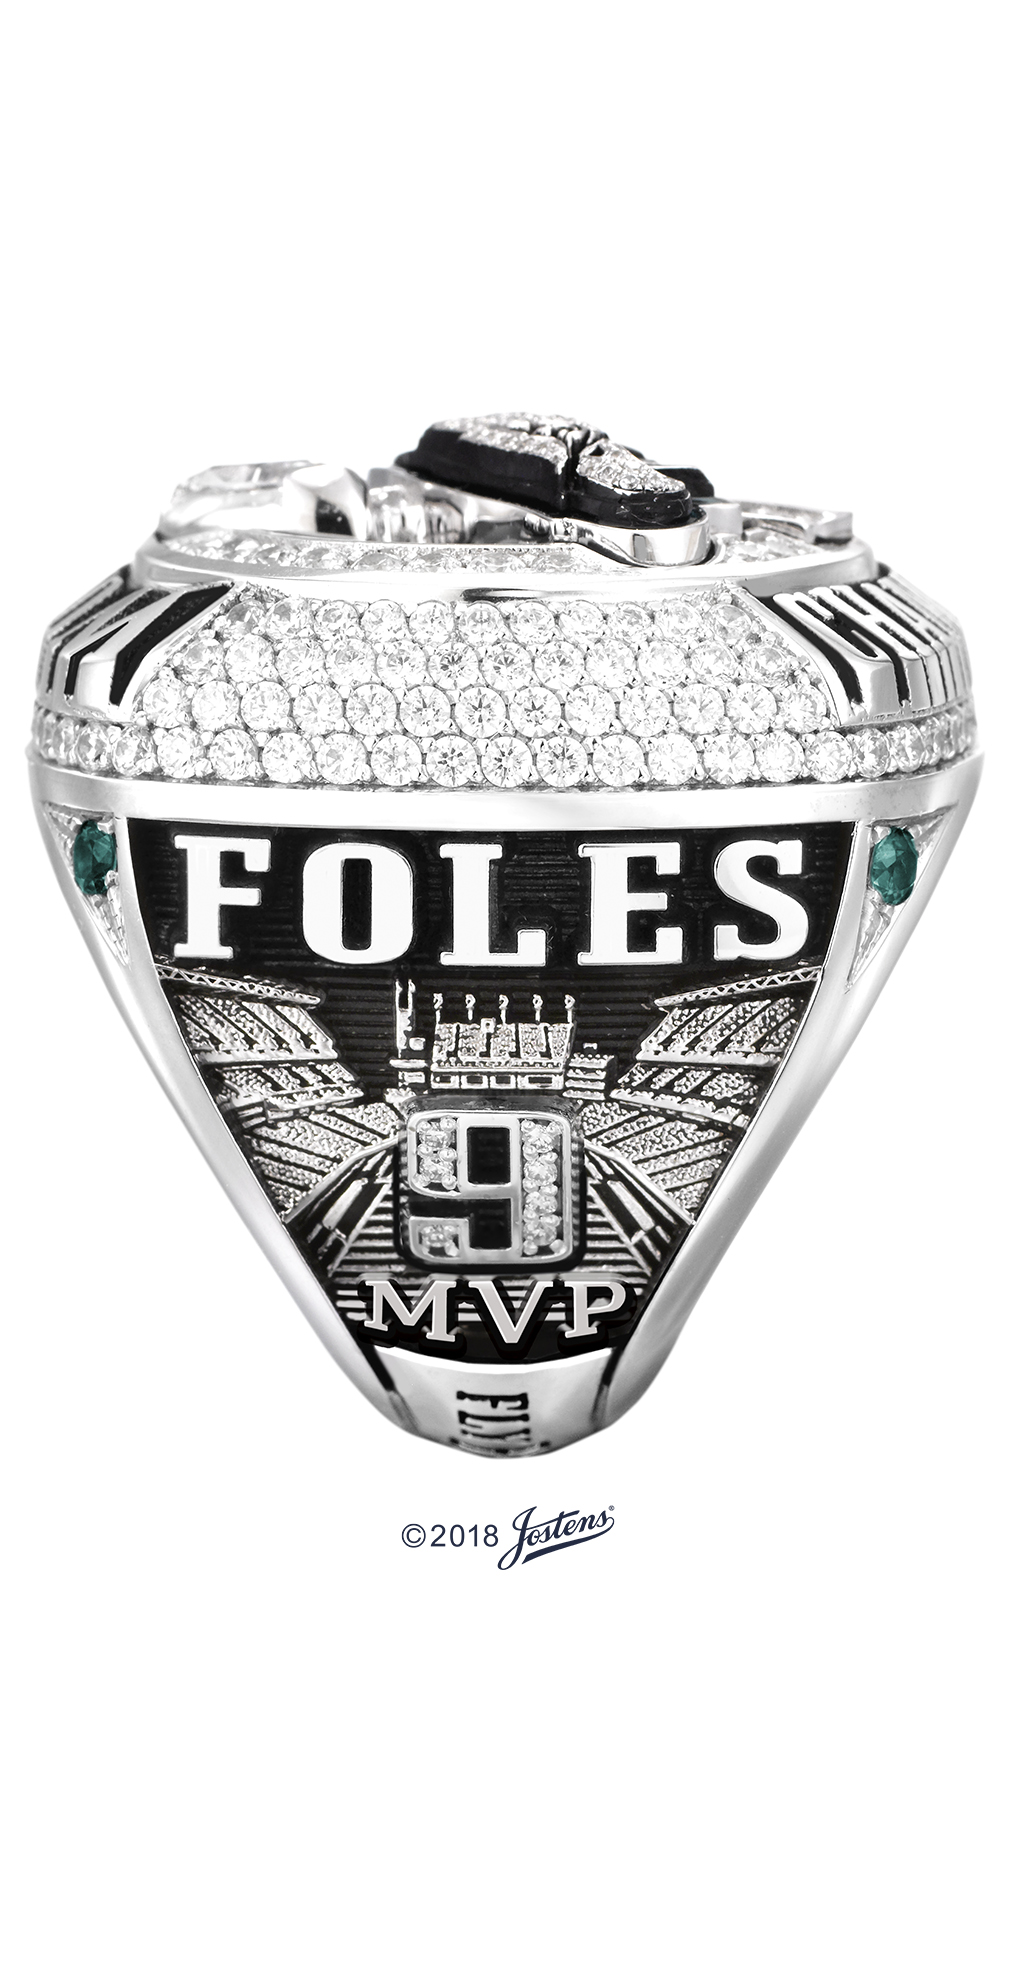 Eagles Super Bowl Ring Highlights Unlikely, Spectacular Win